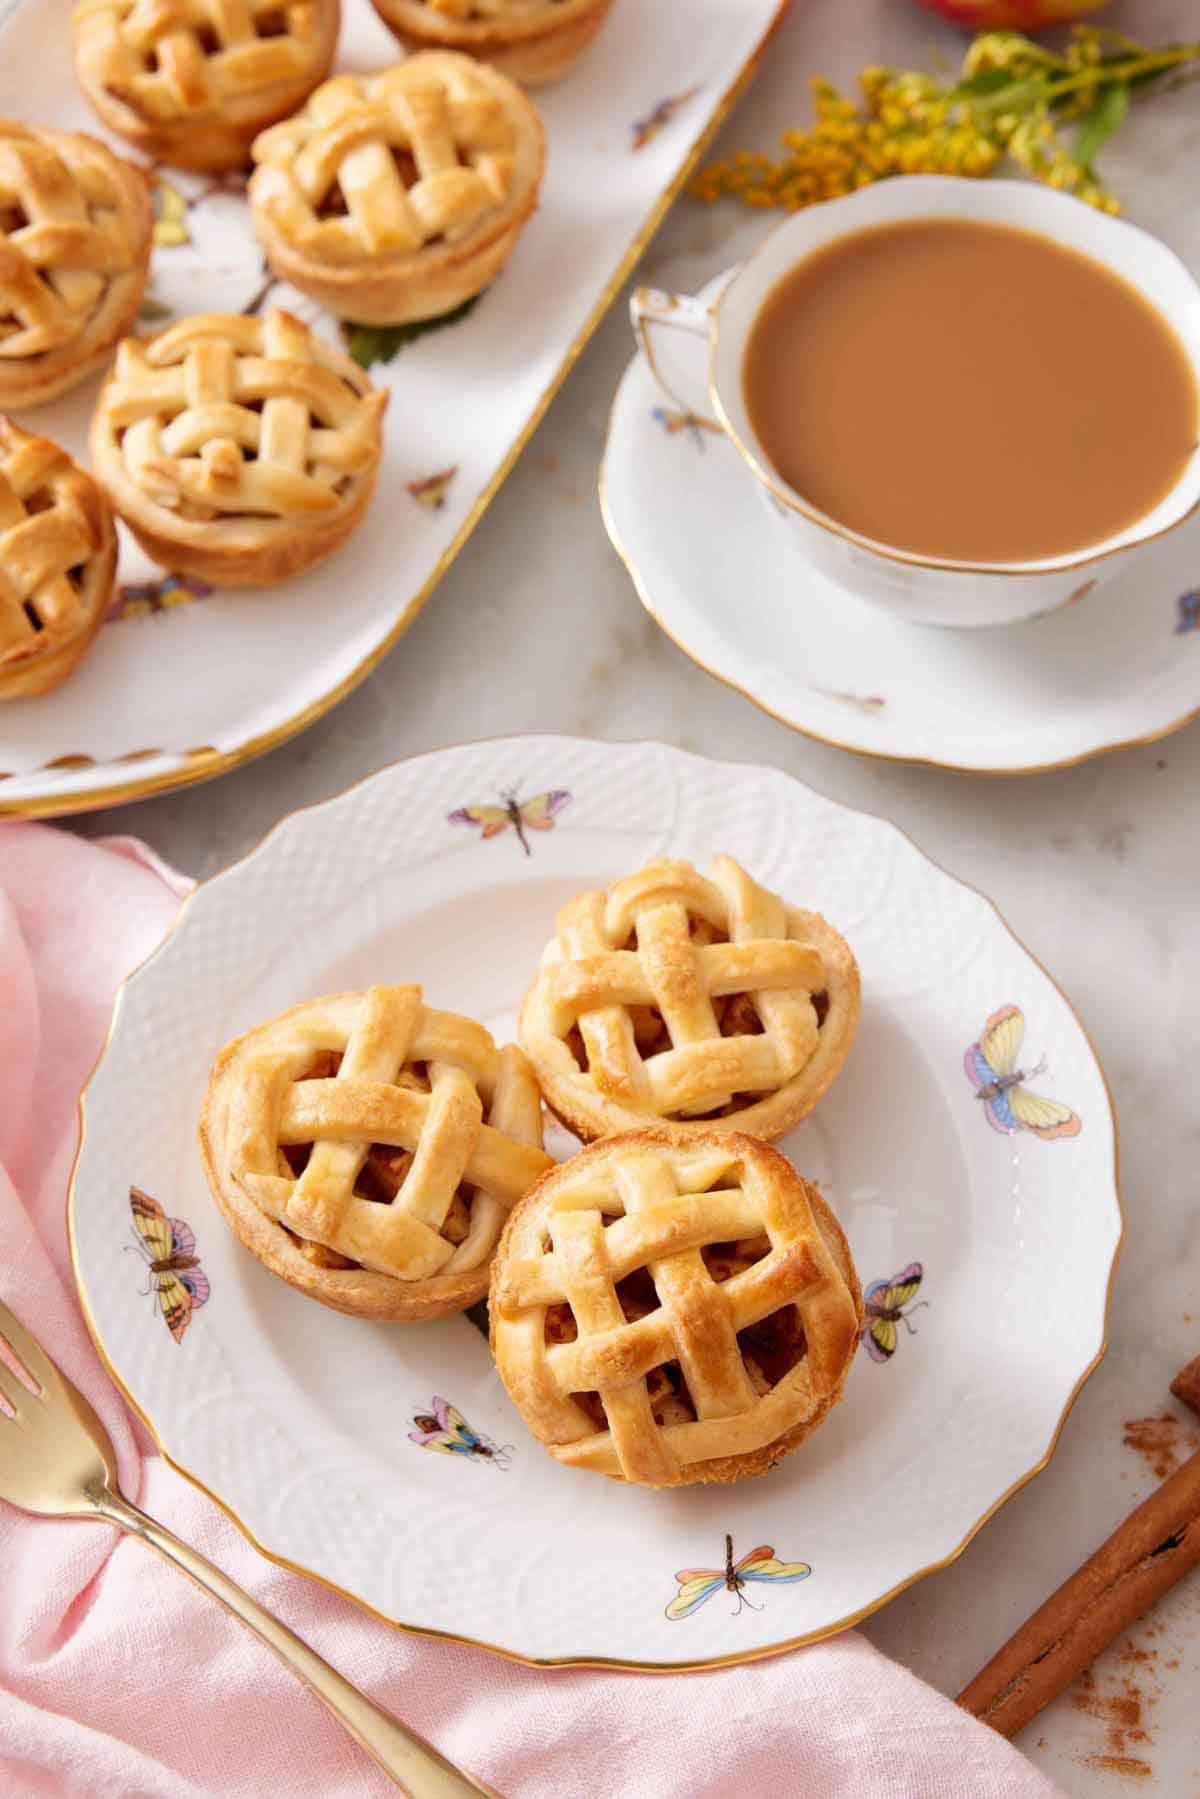 A plate with three mini apple pies with a cup of coffee and platter or more mini apple pies behind it.